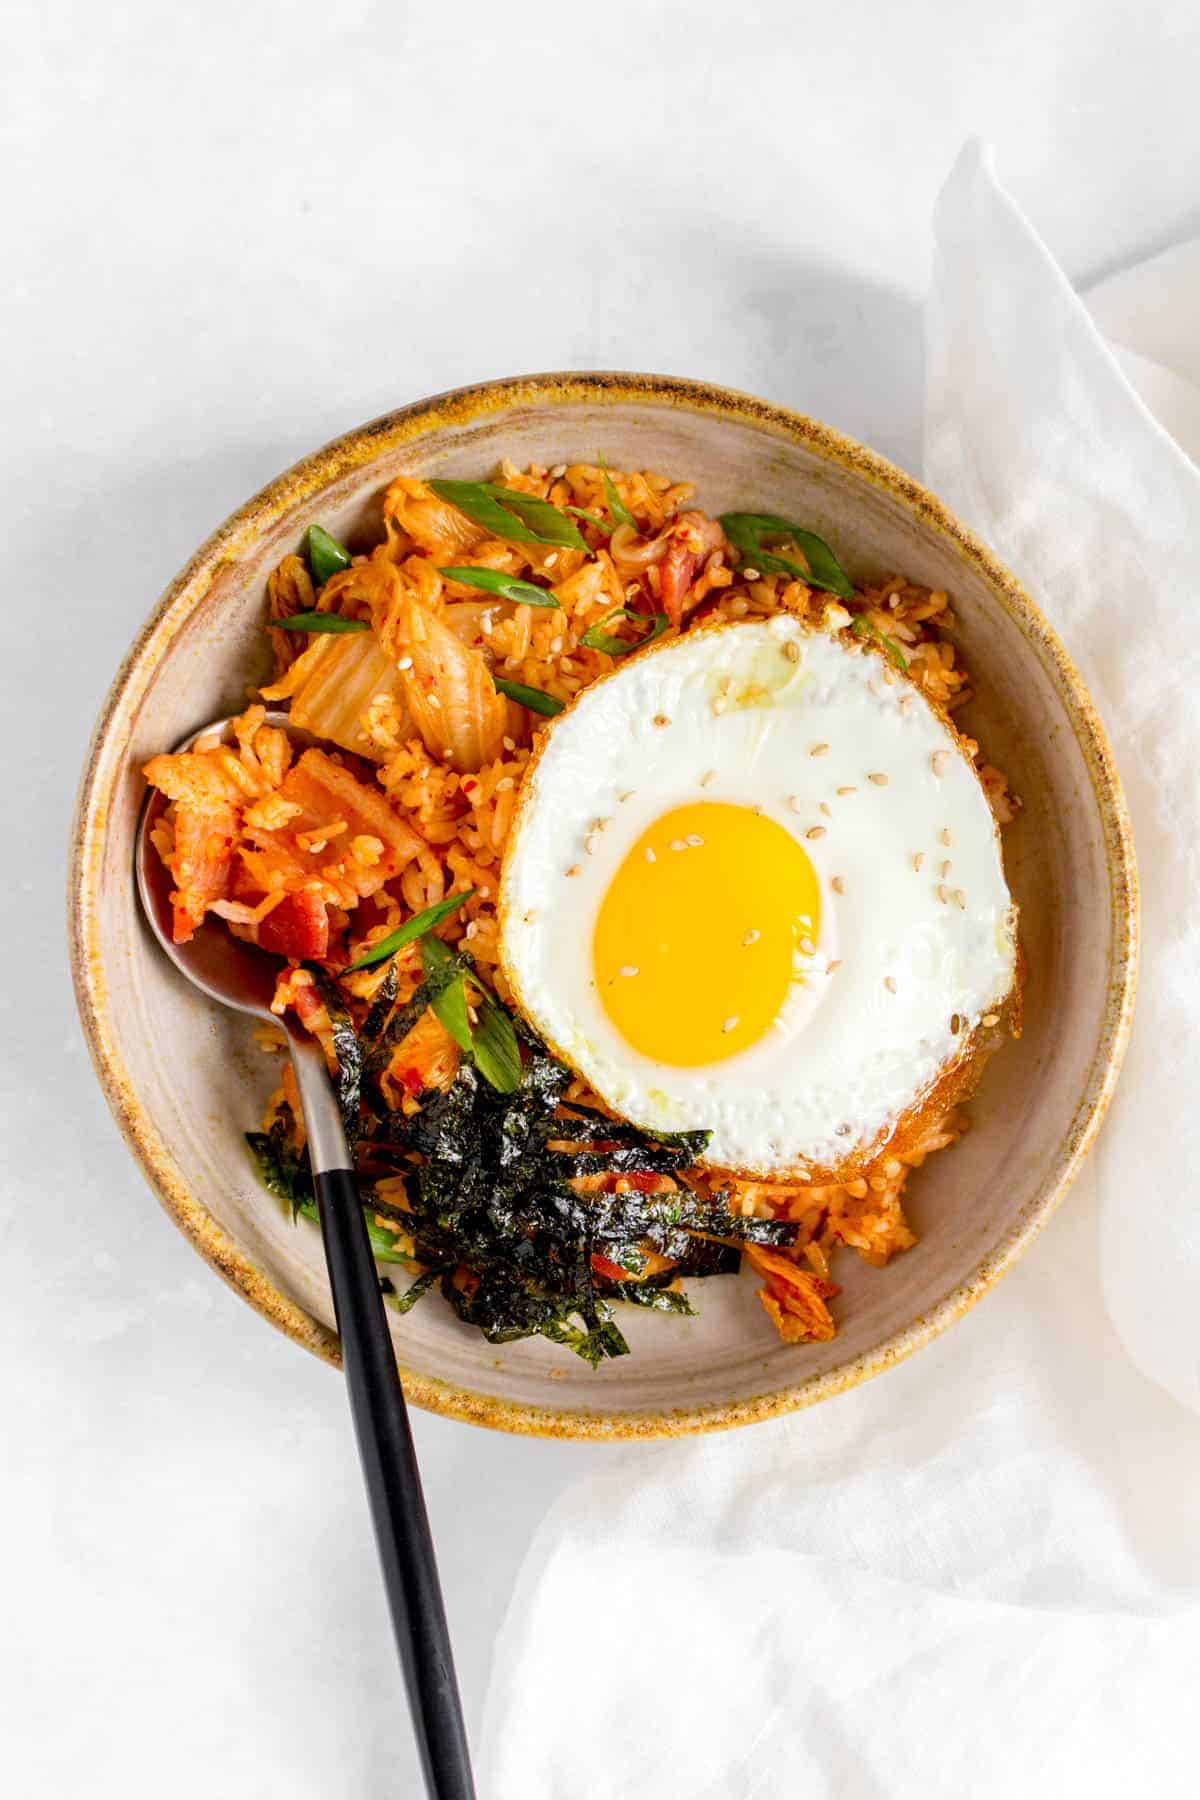 Overhead view of a bowl of bacon kimchi fried rice with a fried egg and shredded seaweed on top with a spoon tucked into the rice.